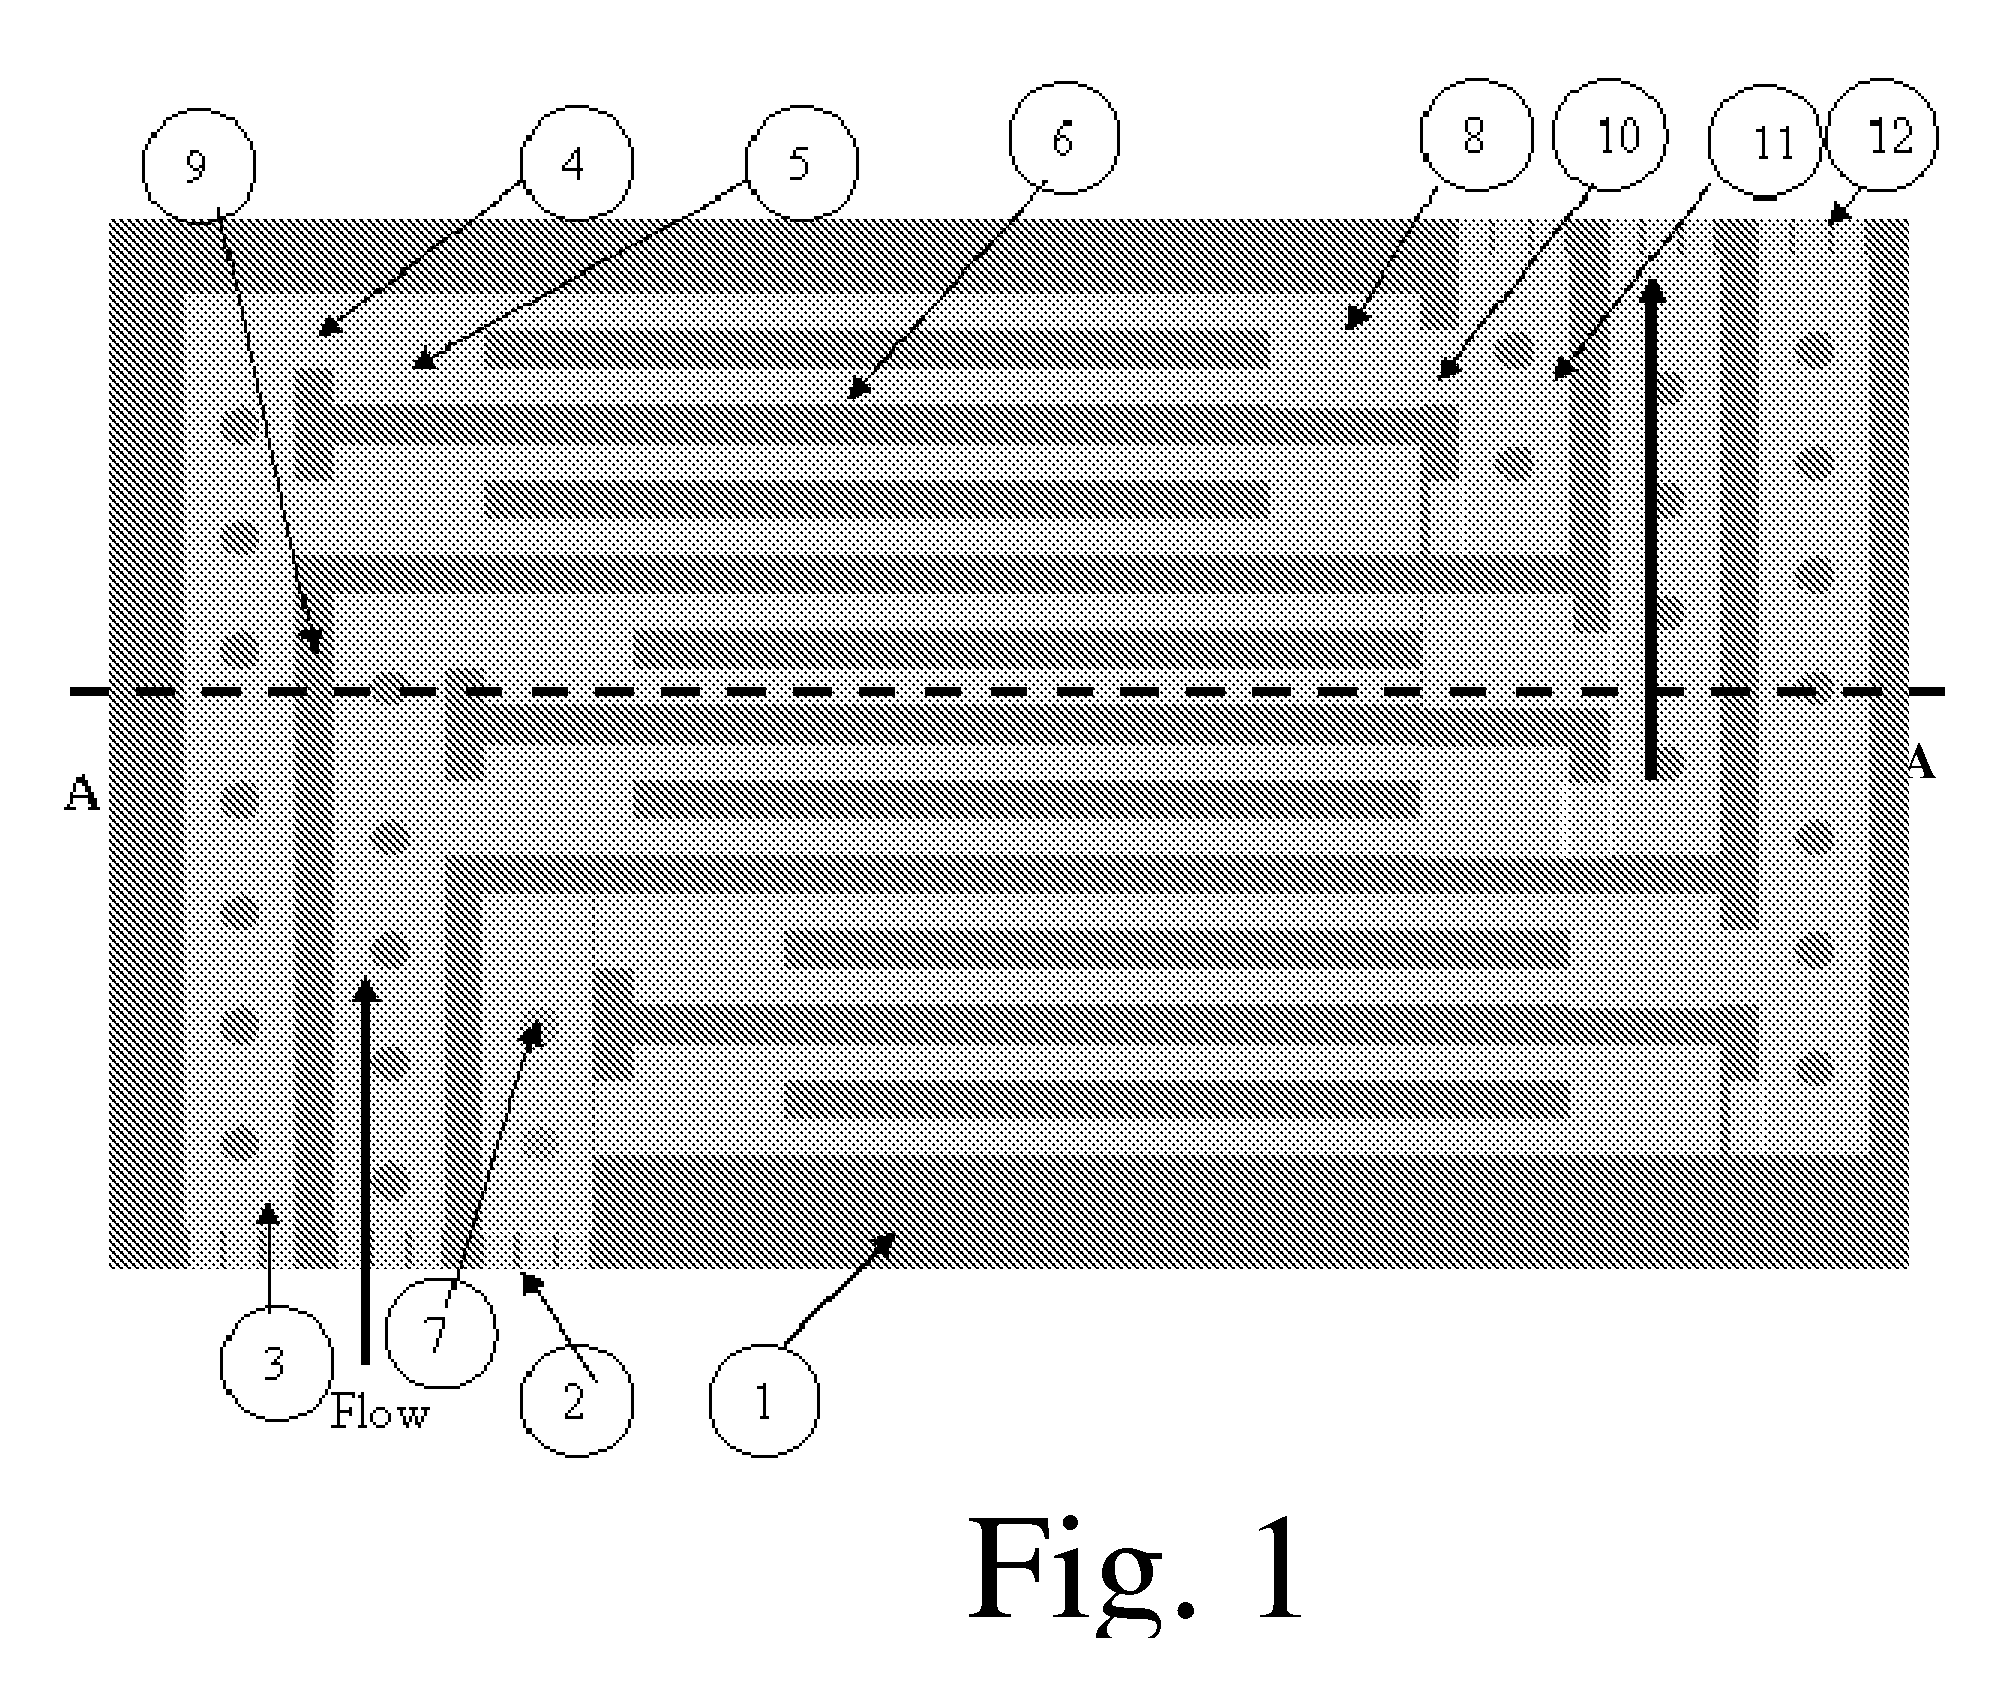 Microchannel Apparatus and Methods of Conducting Unit Operations With Disrupted Flow